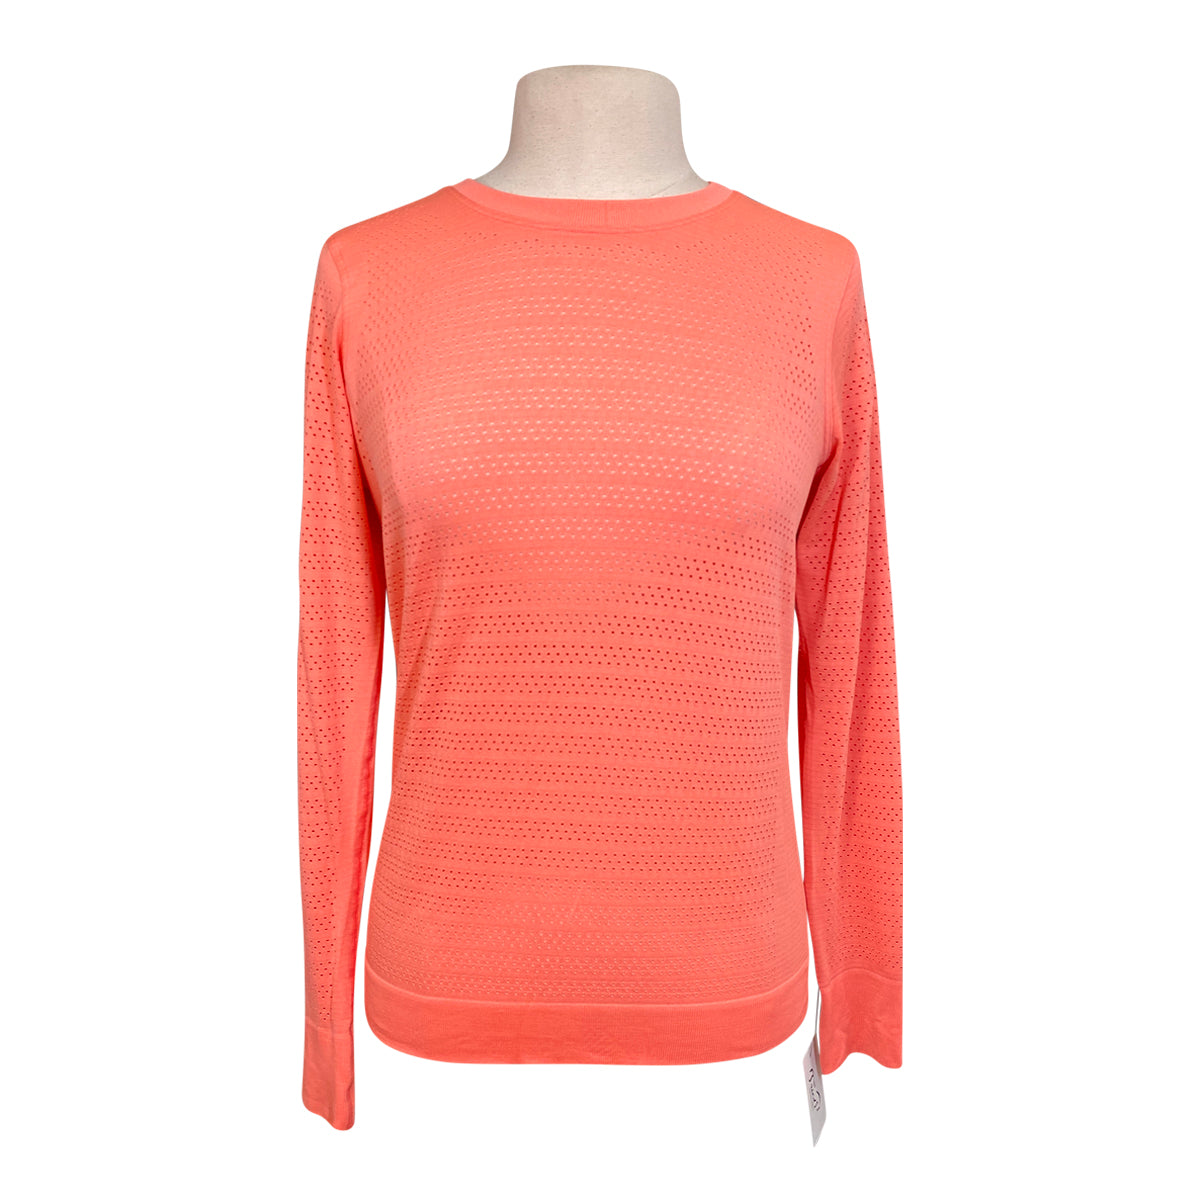 Lululemon 'Breeze By Squad' Long Sleeve Shirt in Coral